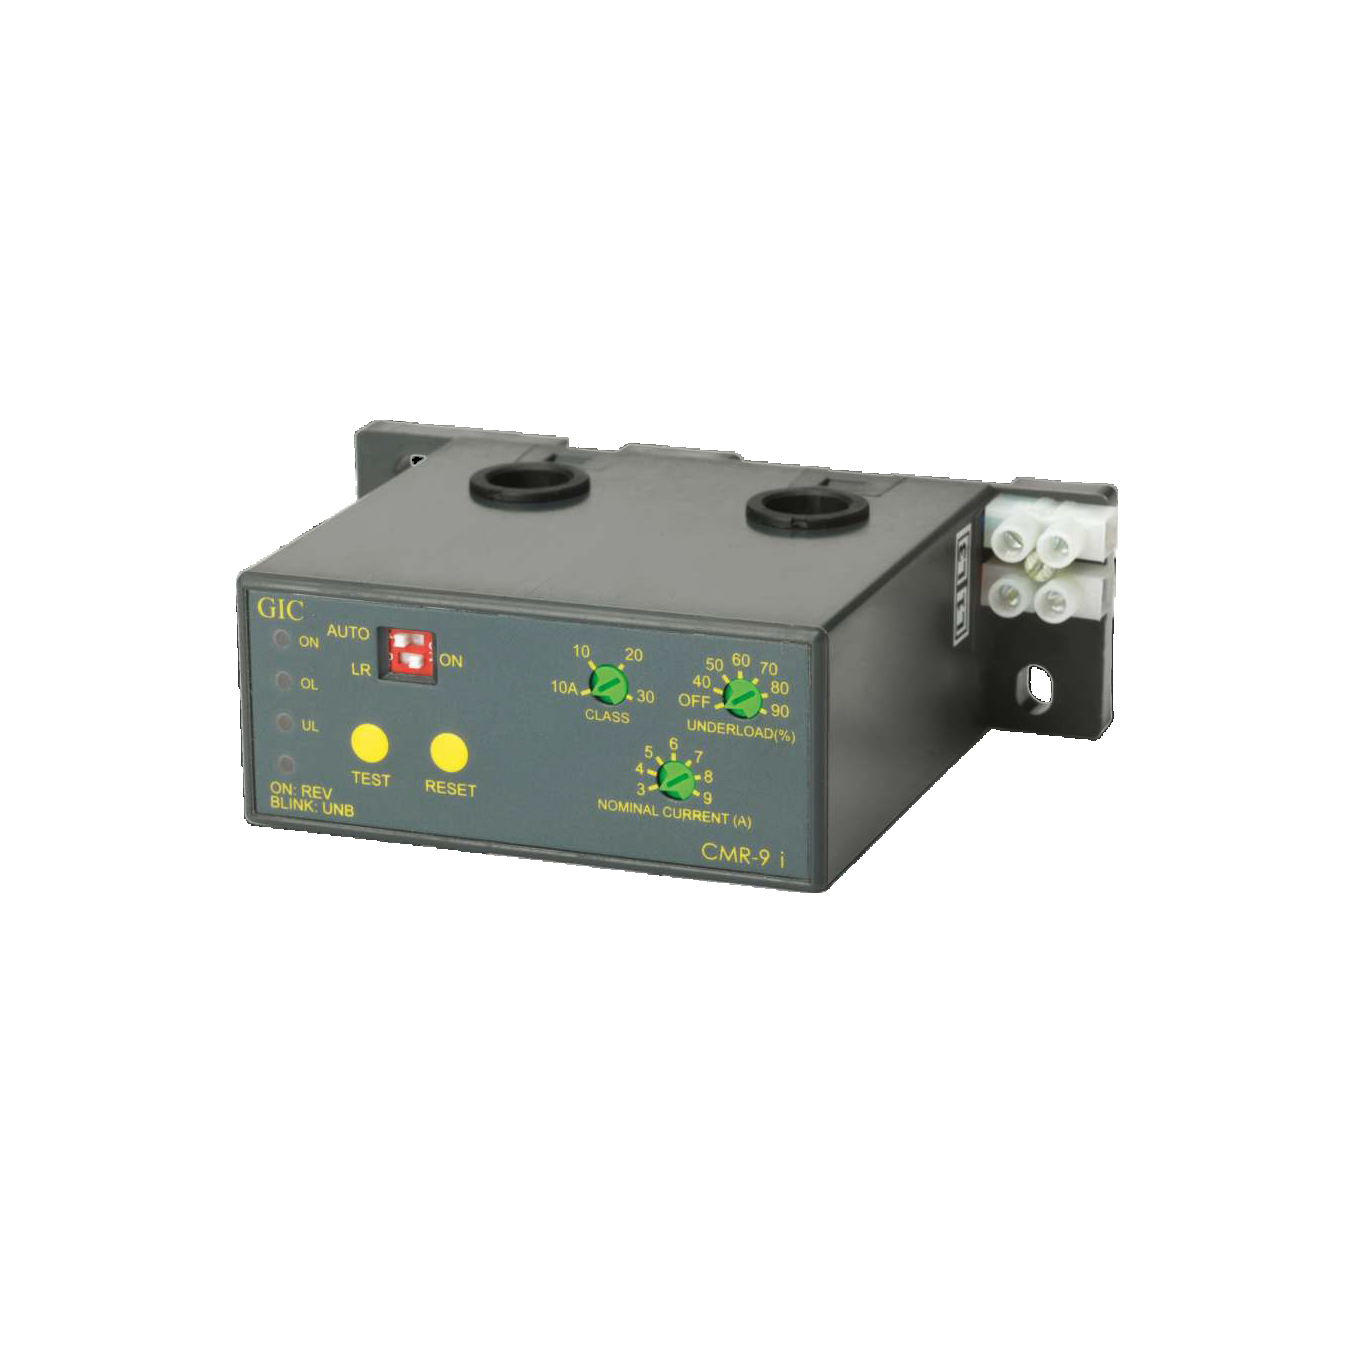 GIC Current Monitoring Relay Inverse 2A - 5A 17C412EB0